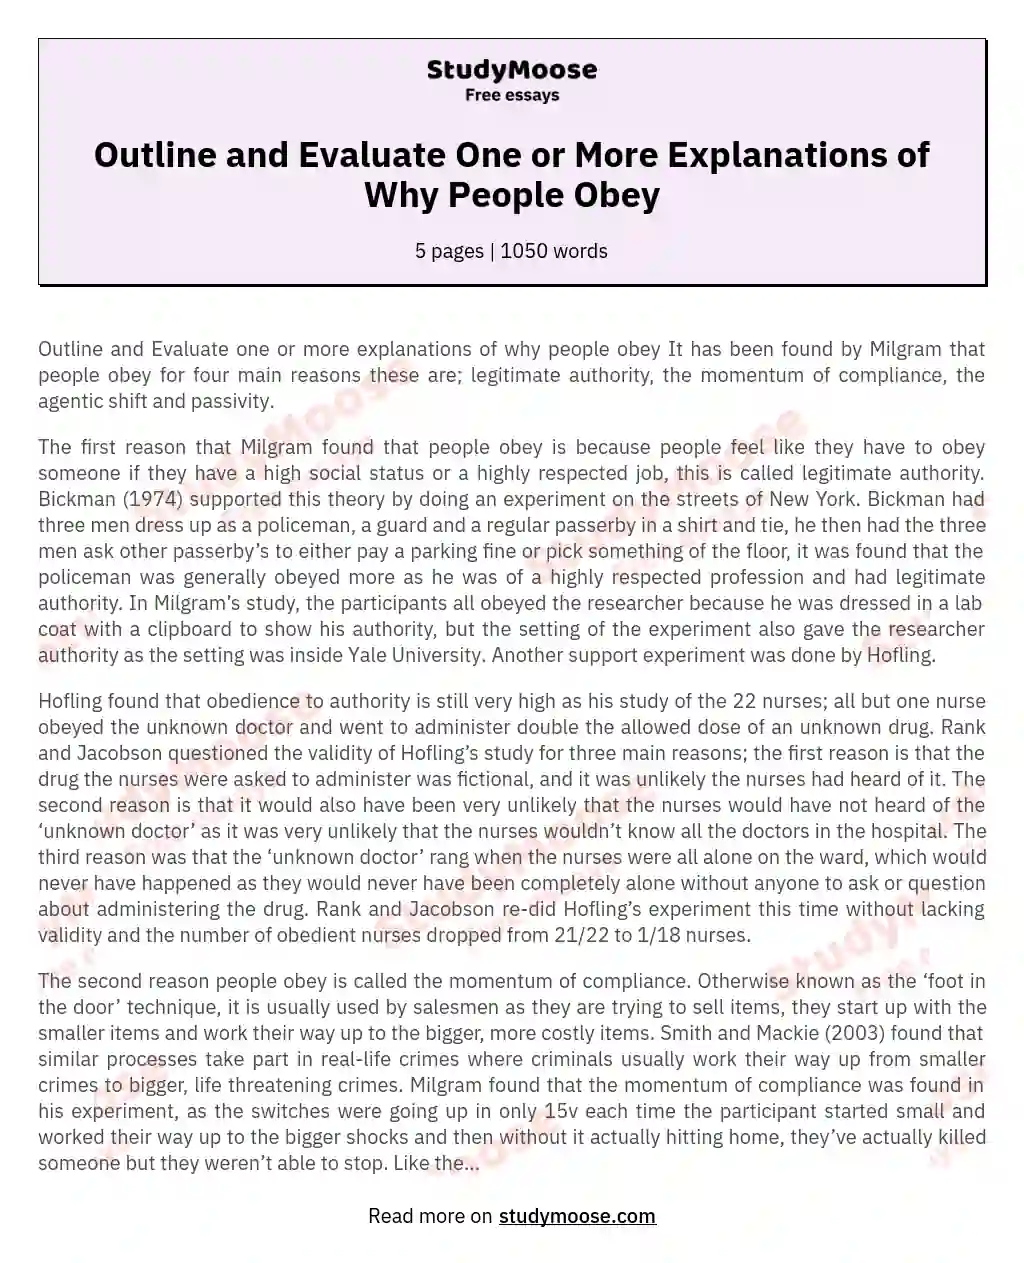 Outline and Evaluate One or More Explanations of Why People Obey essay